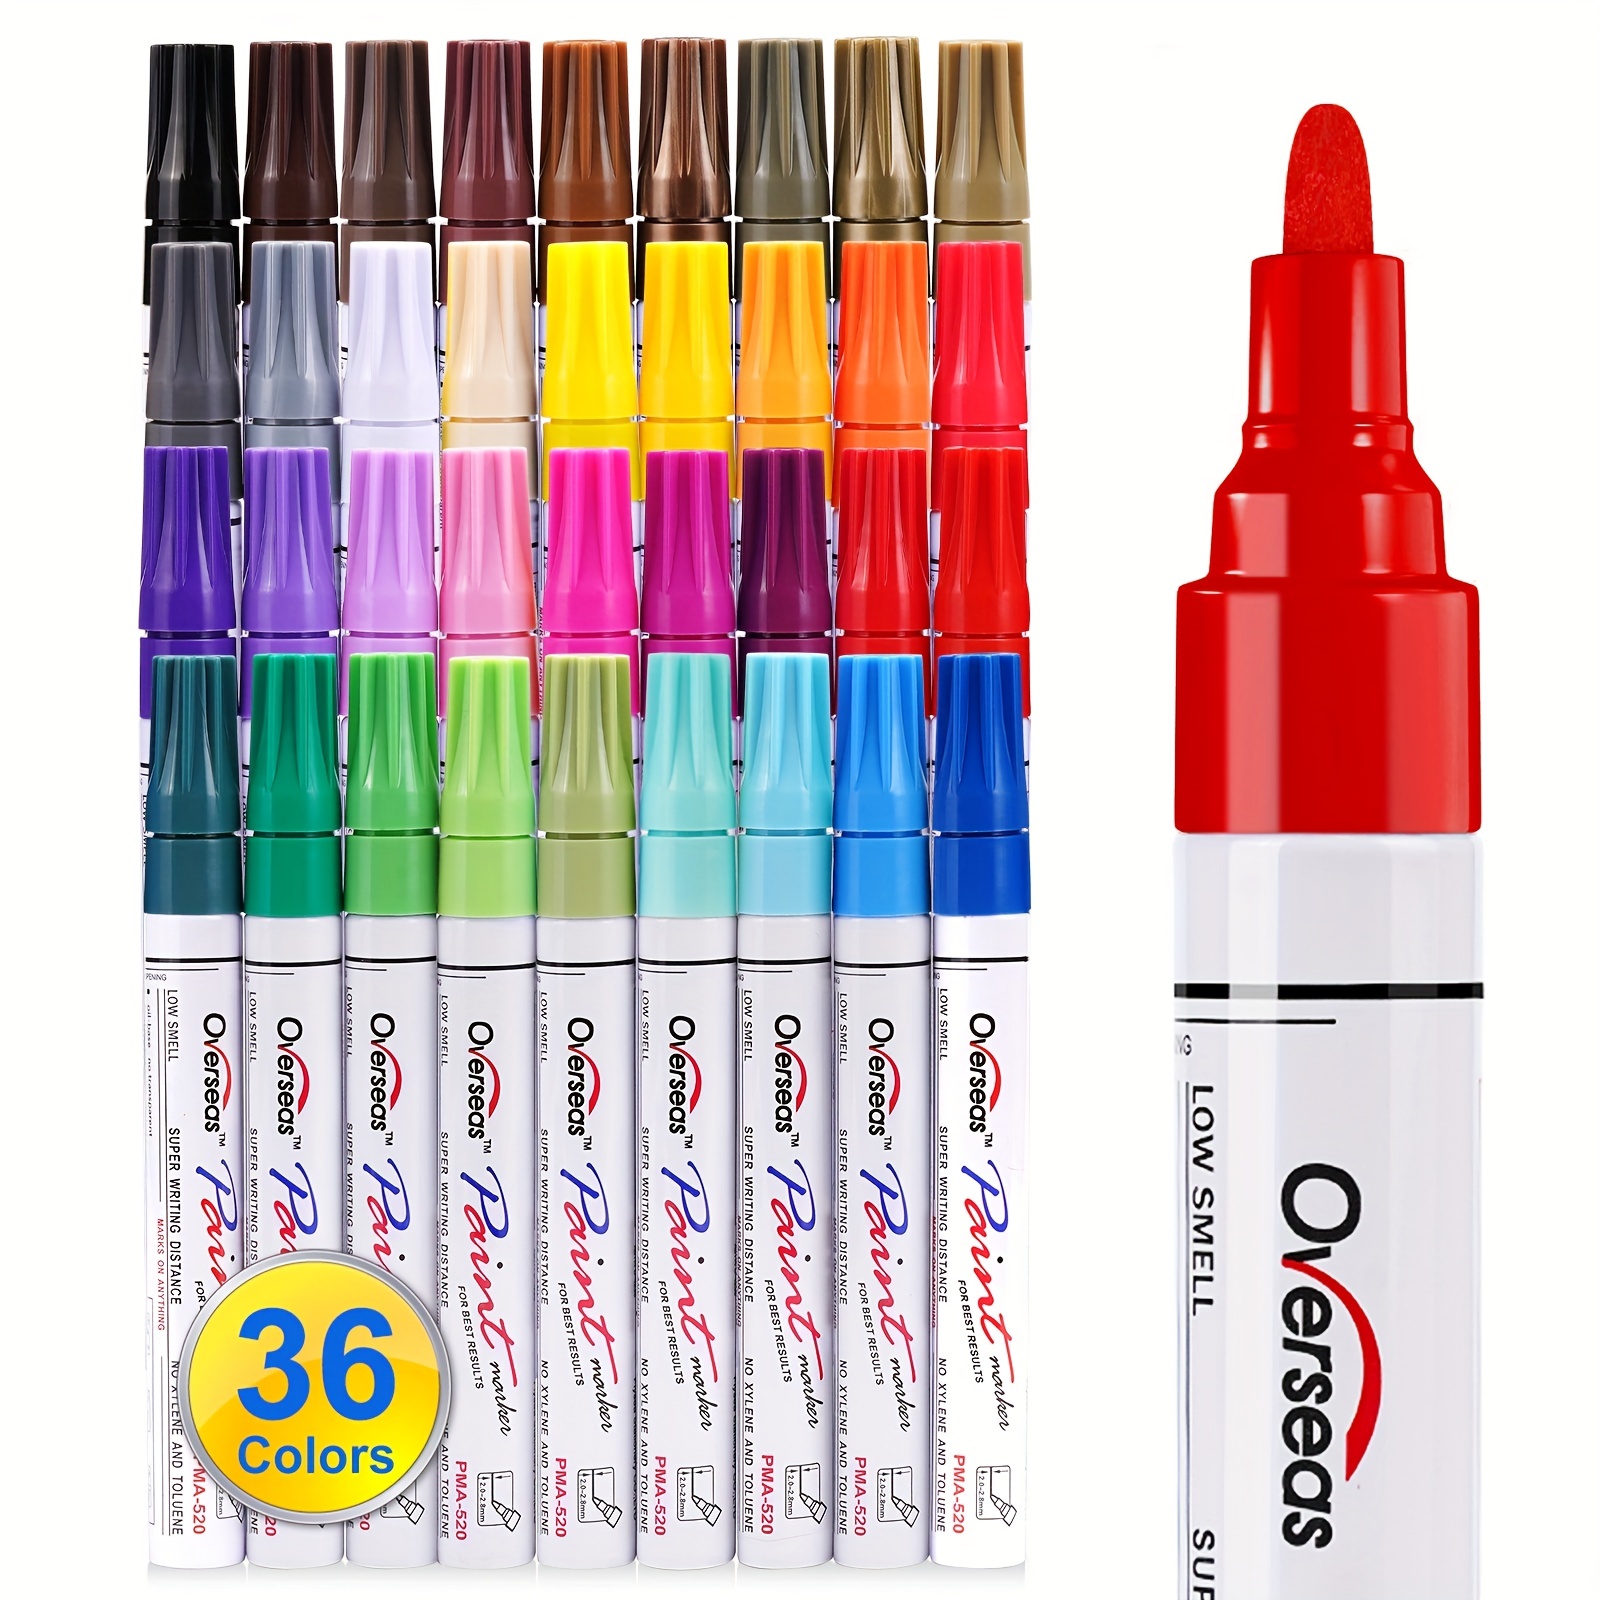 Best Paint Pens and Paint Markers for Crafts